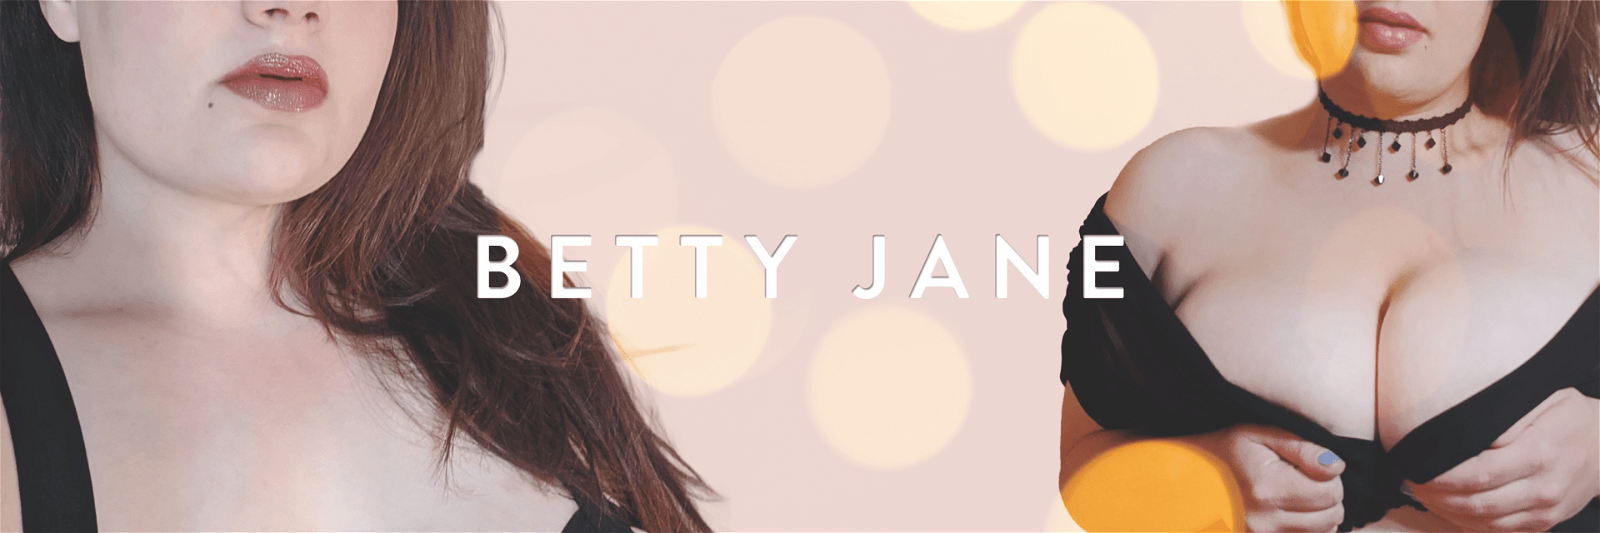 Cover photo of GoddessBetty